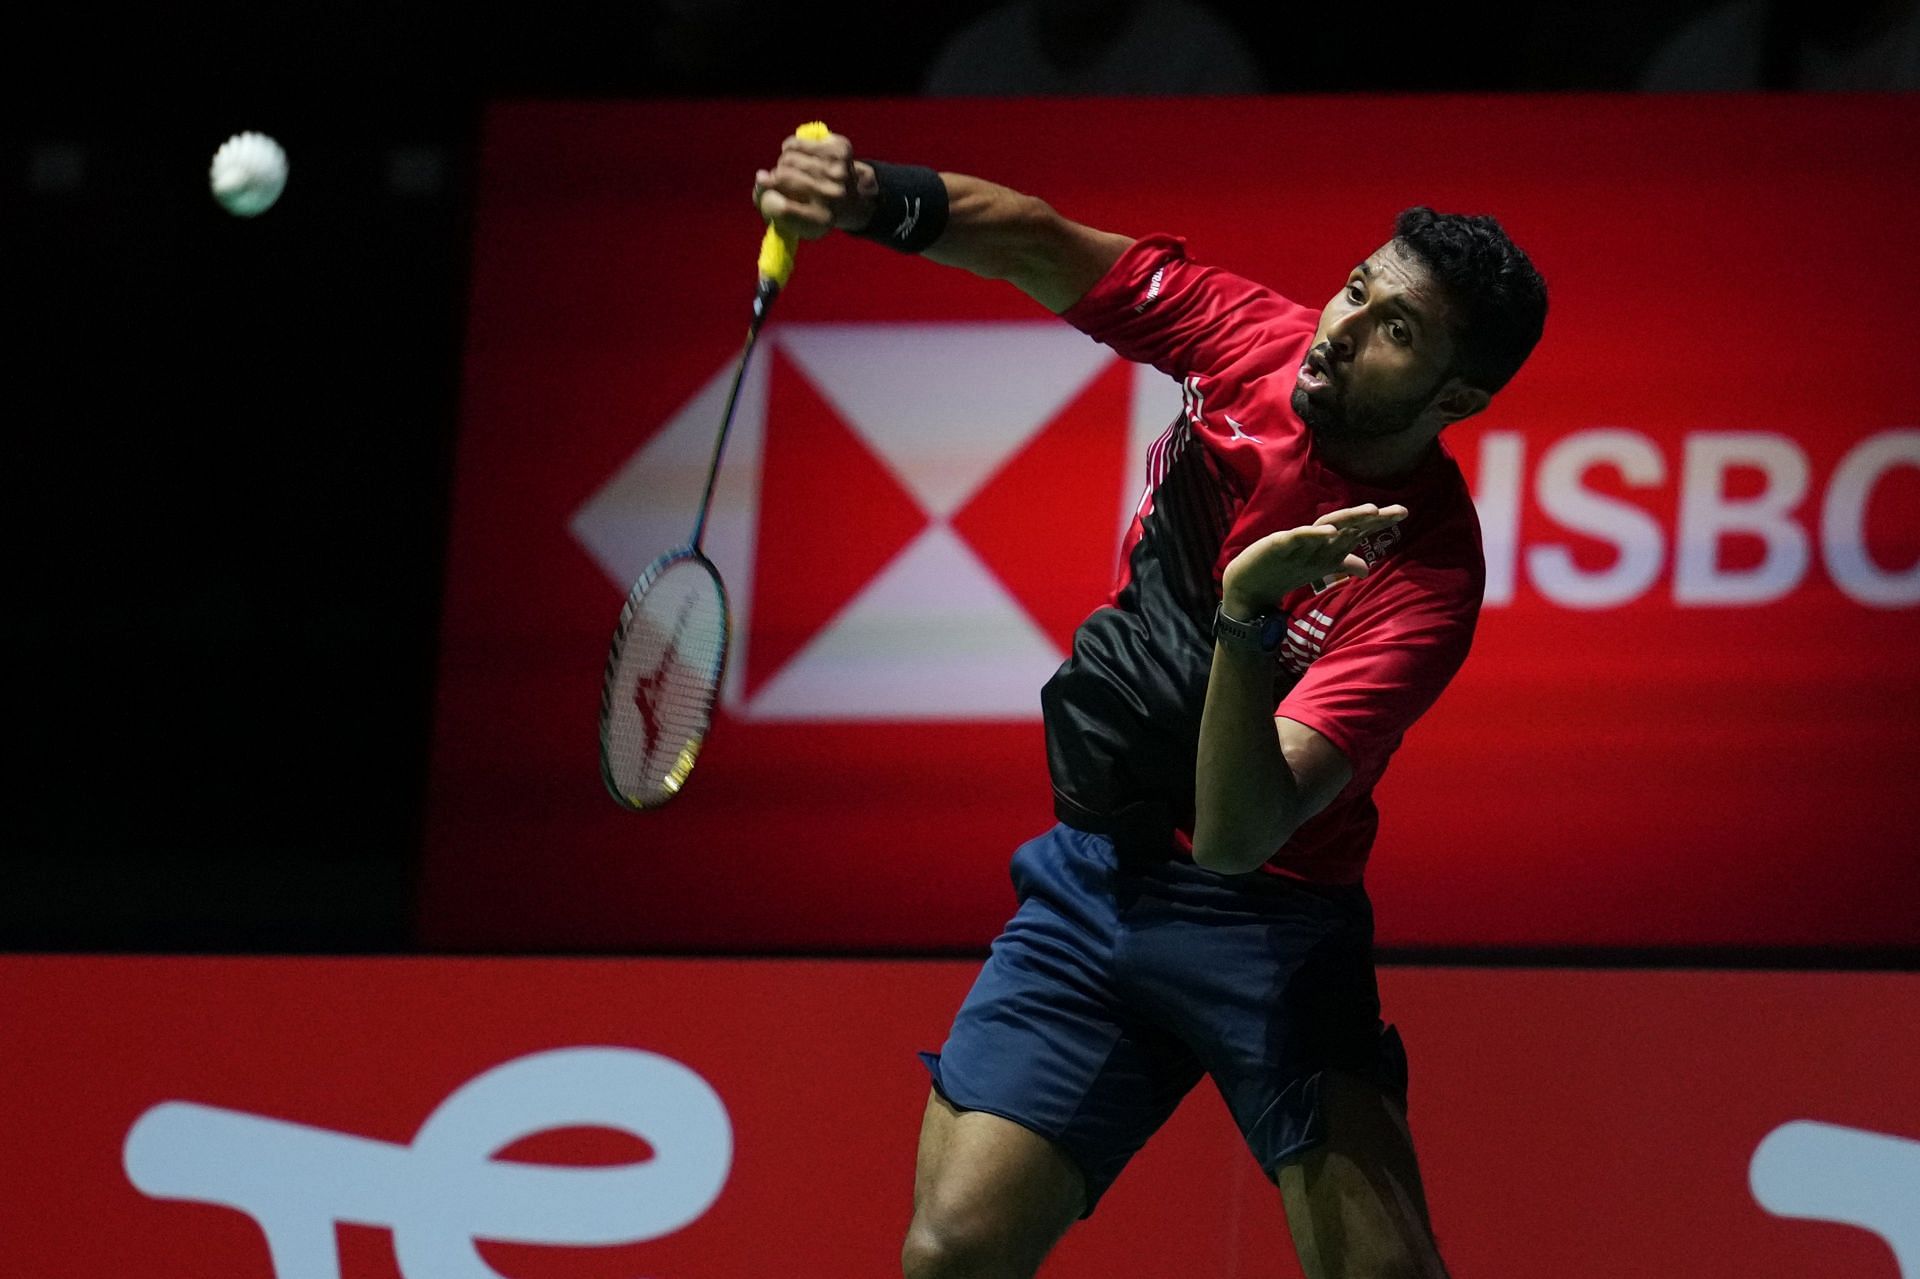 Swiss Open 2023 HS Prannoy vs Shi Yu Qi preview, head-to-head, prediction, where to watch and live streaming details